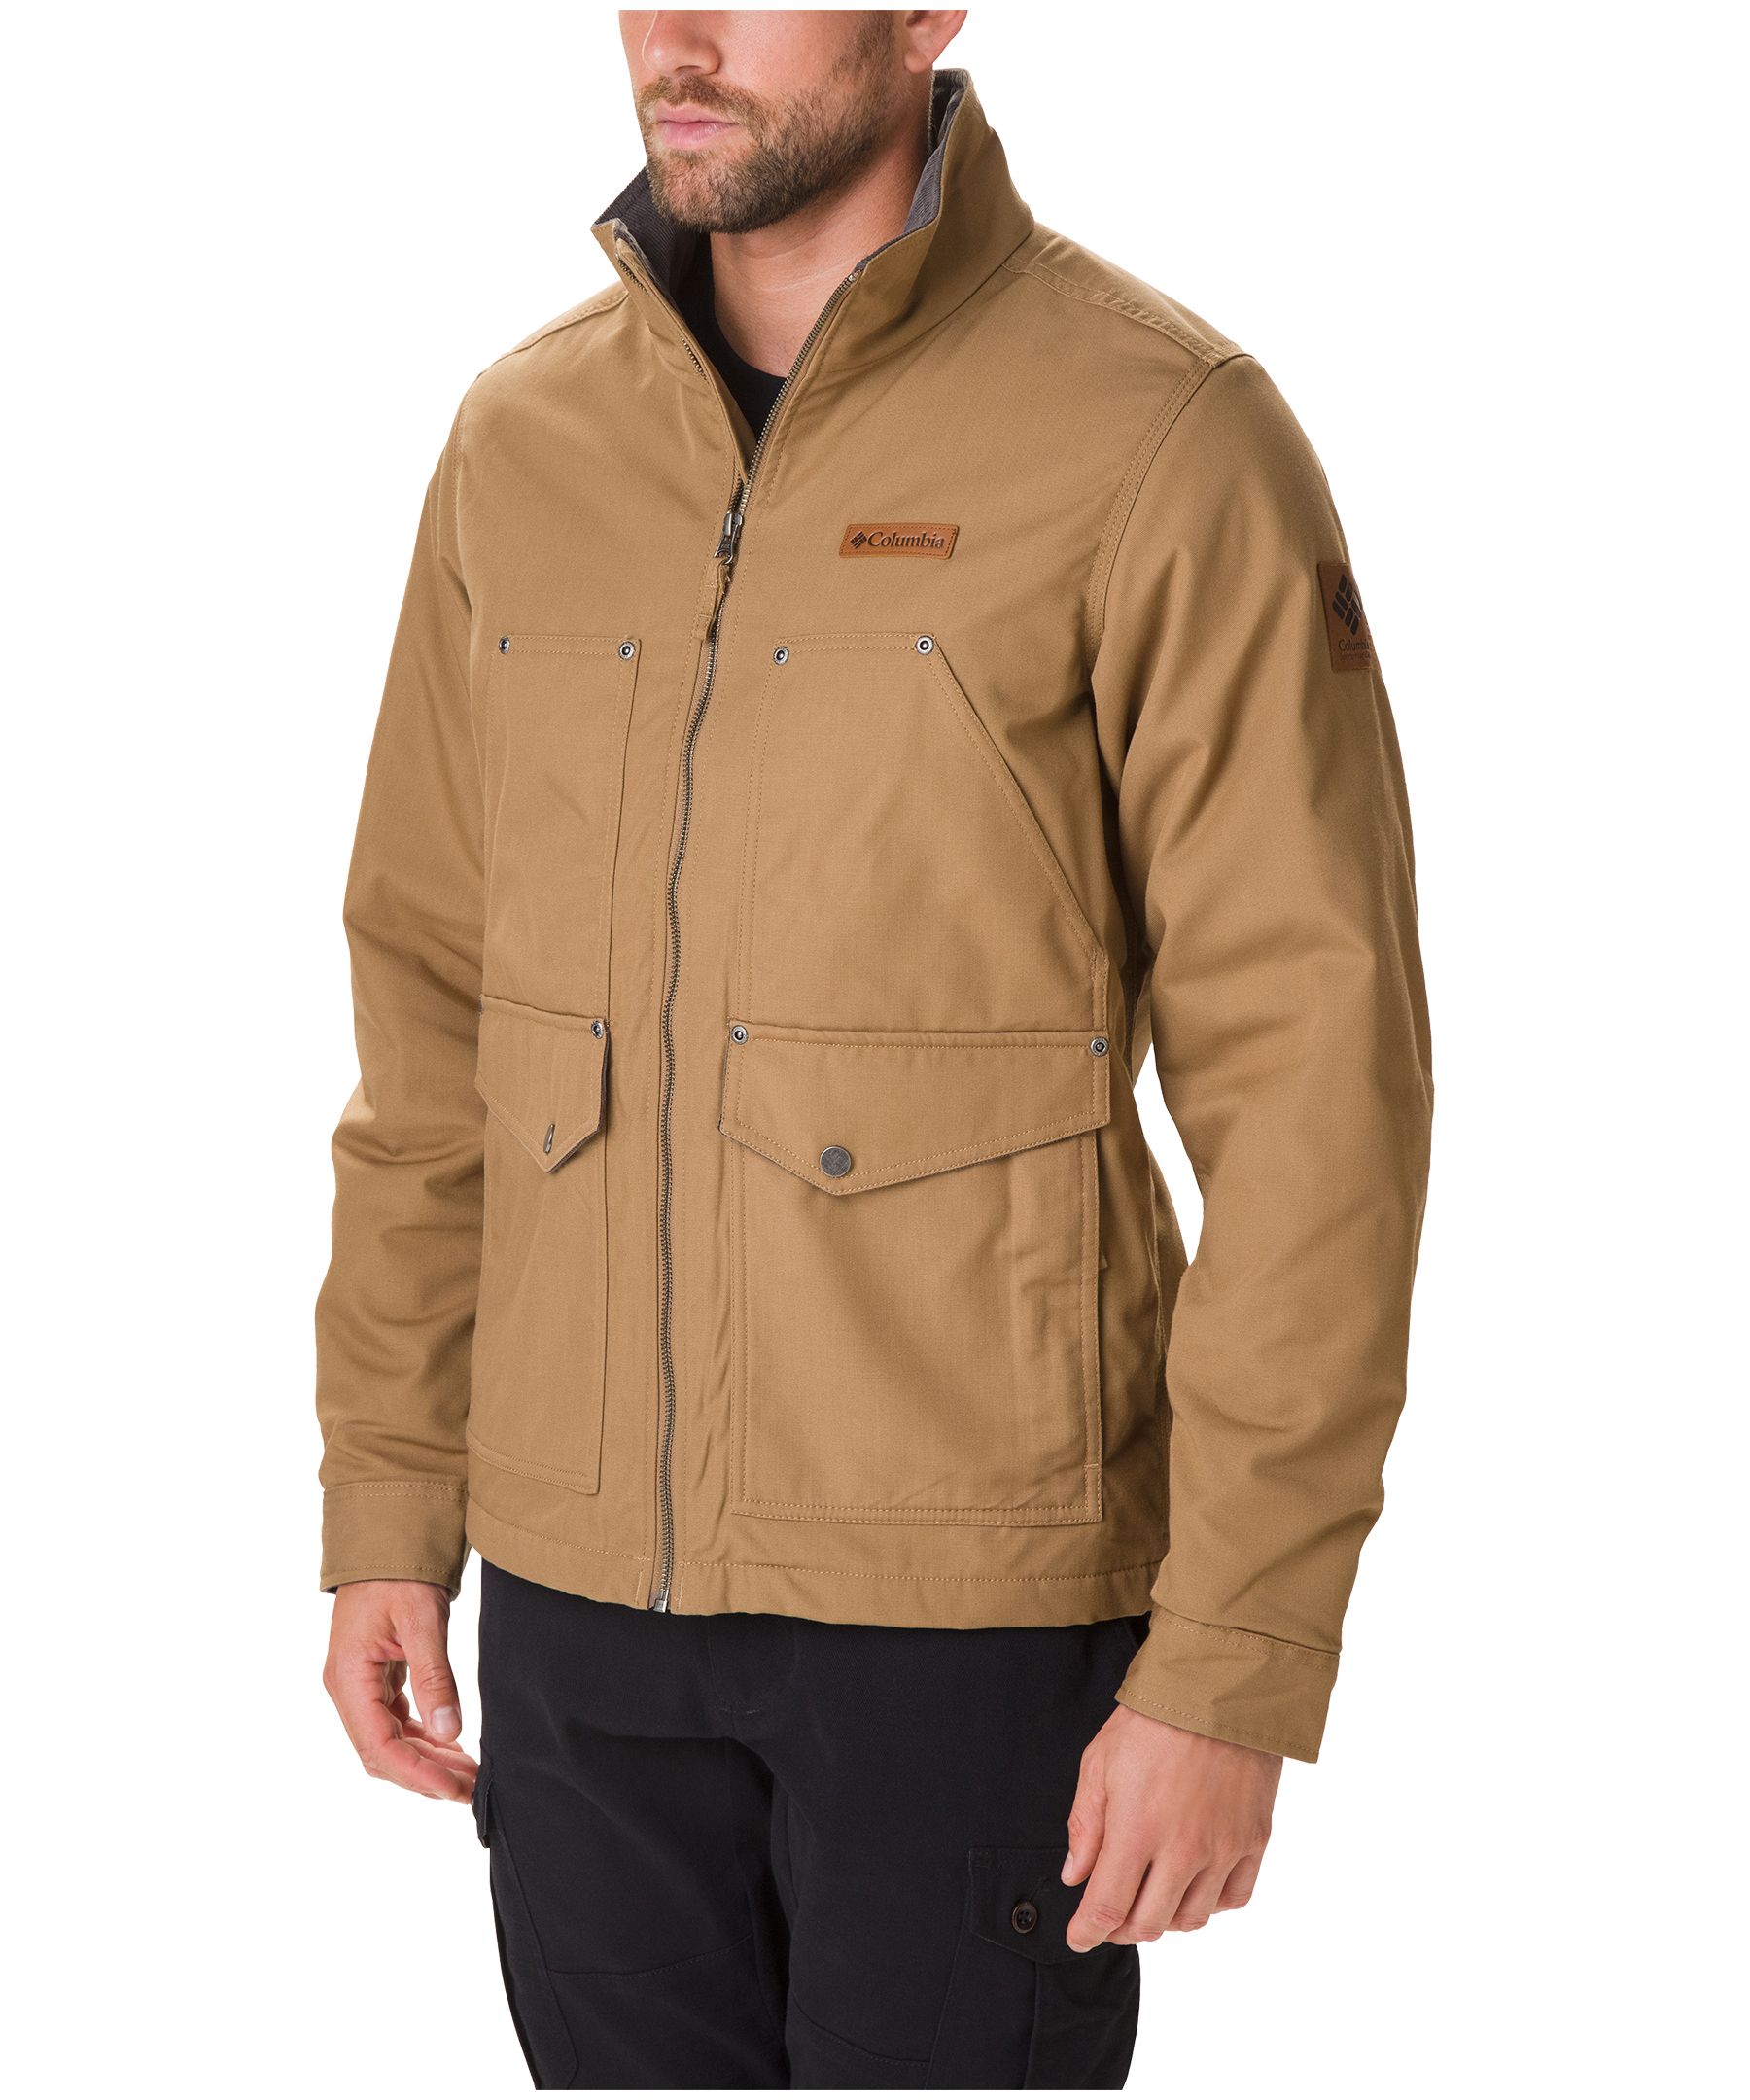 Columbia Men's Loma Vista Water Resistant Fleece Lined Insulated Jacket